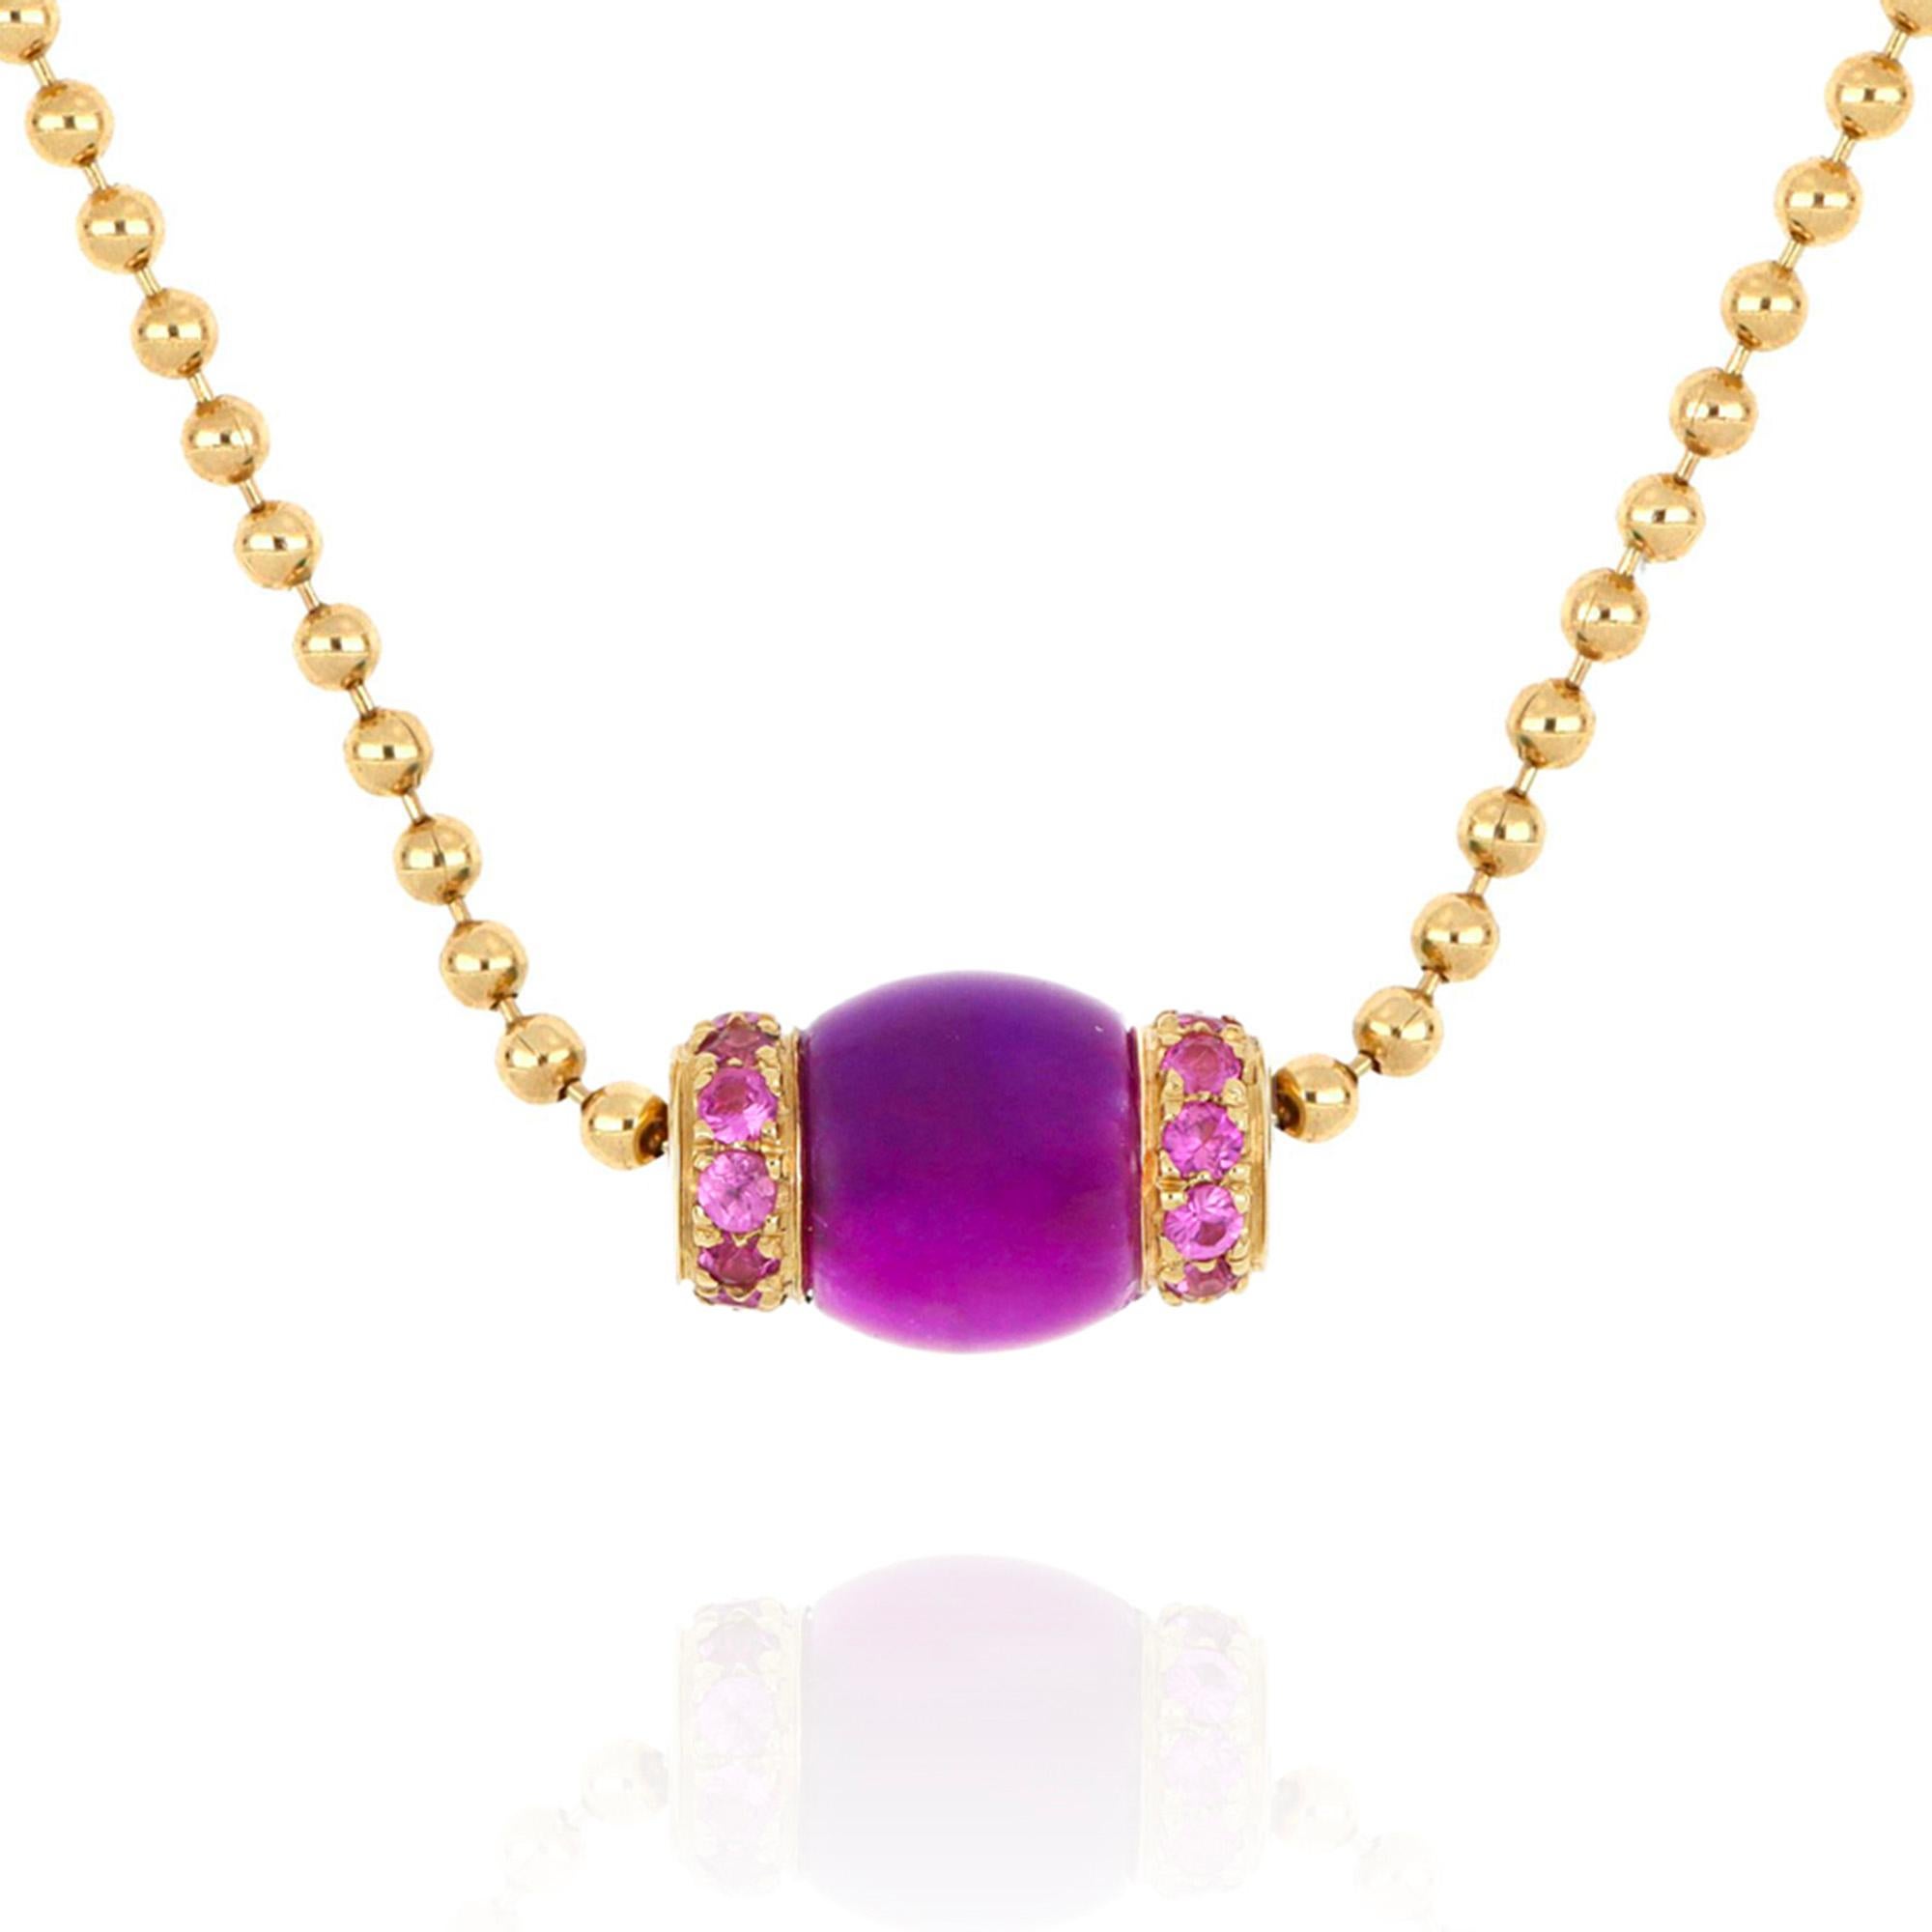 Avant-garde design, simple and linear volumes come together in this necklace from Le Carrousel collection. 18-karat yellow gold, combined with purple jade and the preciousness of pink sapphires, ennobles the three-dimensionality of the barrel-shaped